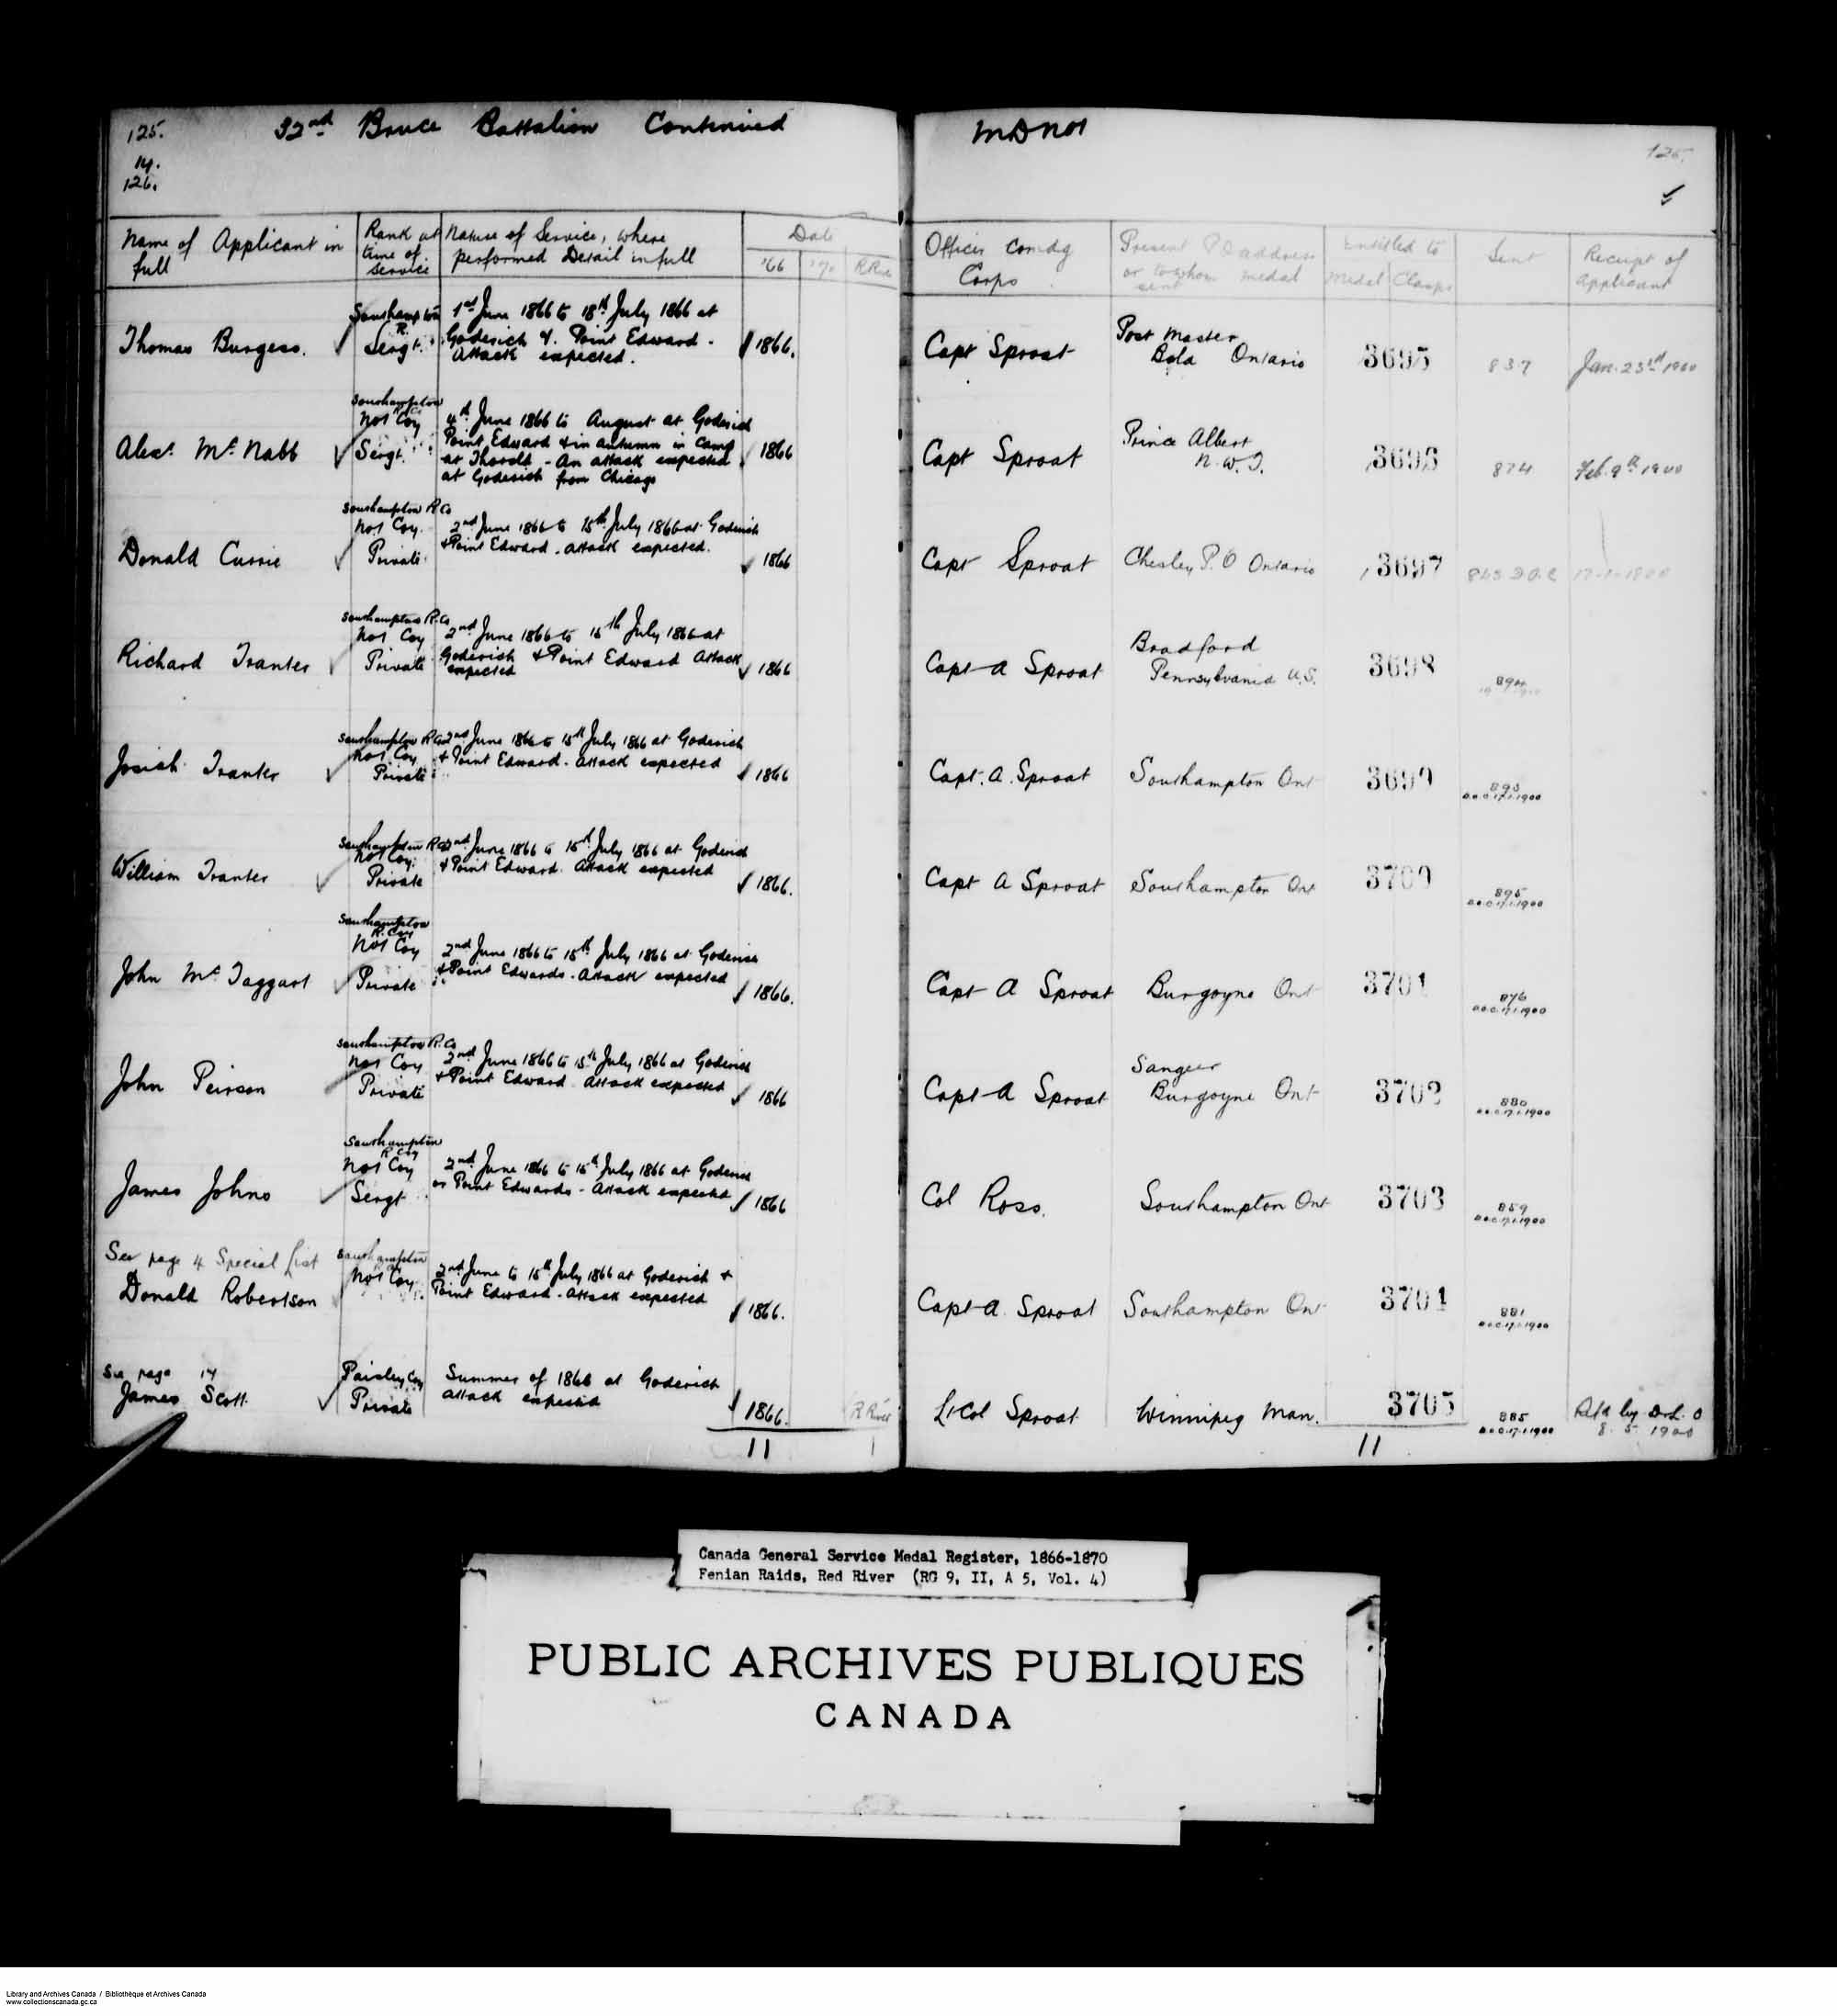 Digitized page of Medals, Honours and Awards for Image No.: e008681812